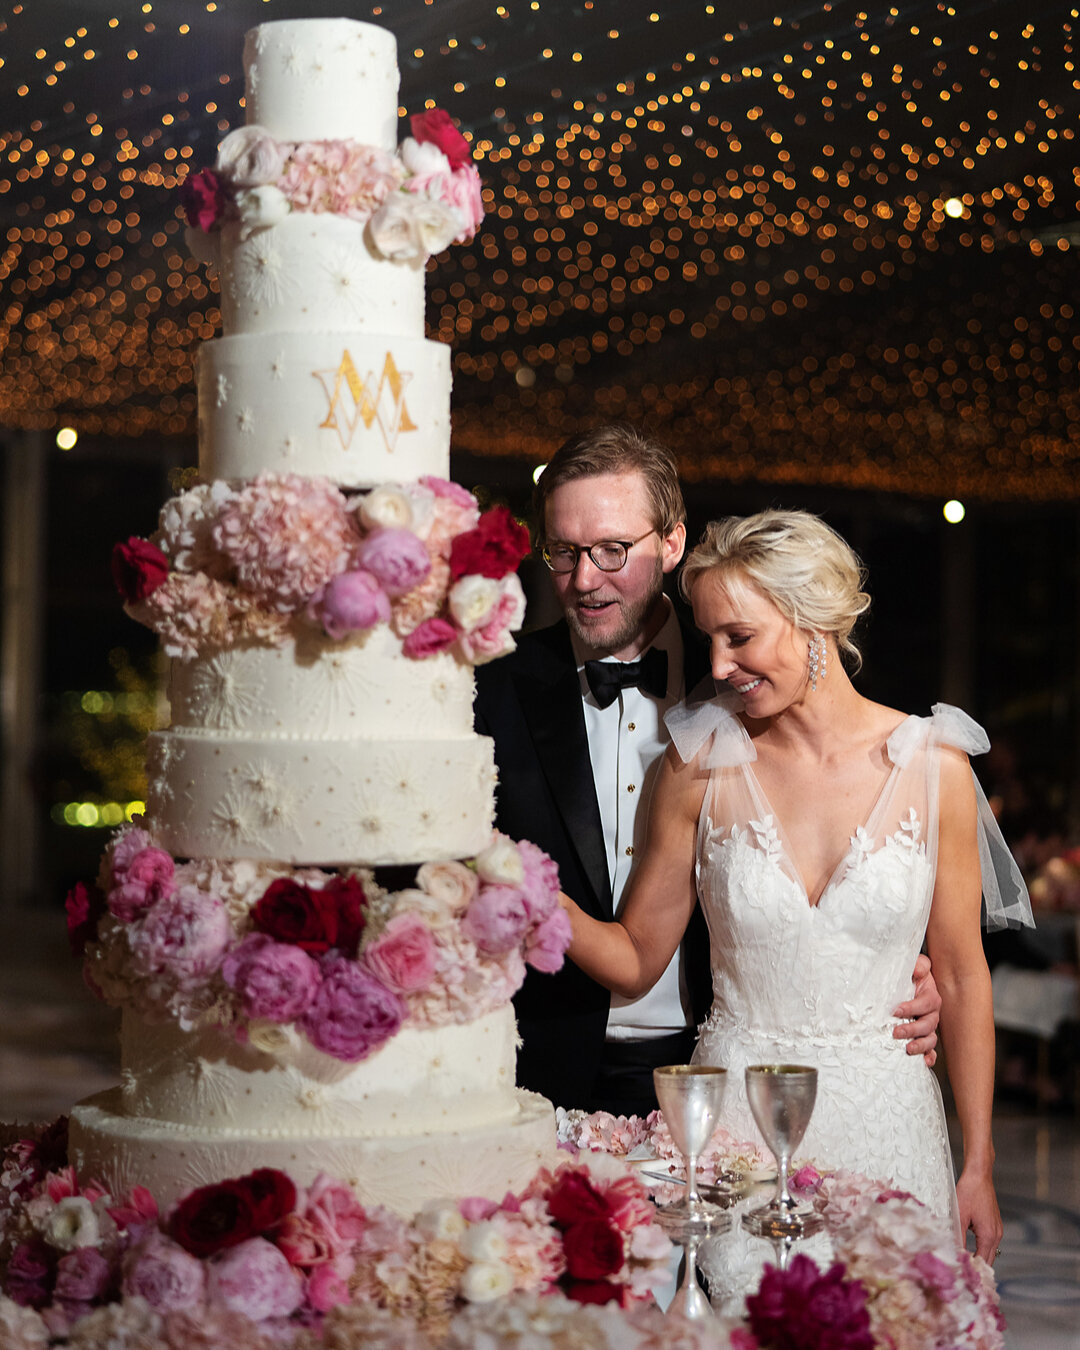 This cake by Panini!​​​​​​​​ 🙌🏻
​​​​​​​​
Wedding planner: @kirstinroseevents​​​​​​​​​​​​​​​​
Photographer: @sarahkatephoto ​​​​​​​​
Videographer: @candlelightfilms ​​​​​​​​
Floral Design: @grodesigns ​​​​​​​​
Paper Goods: @ellishilldallas​​​​​​​​​​